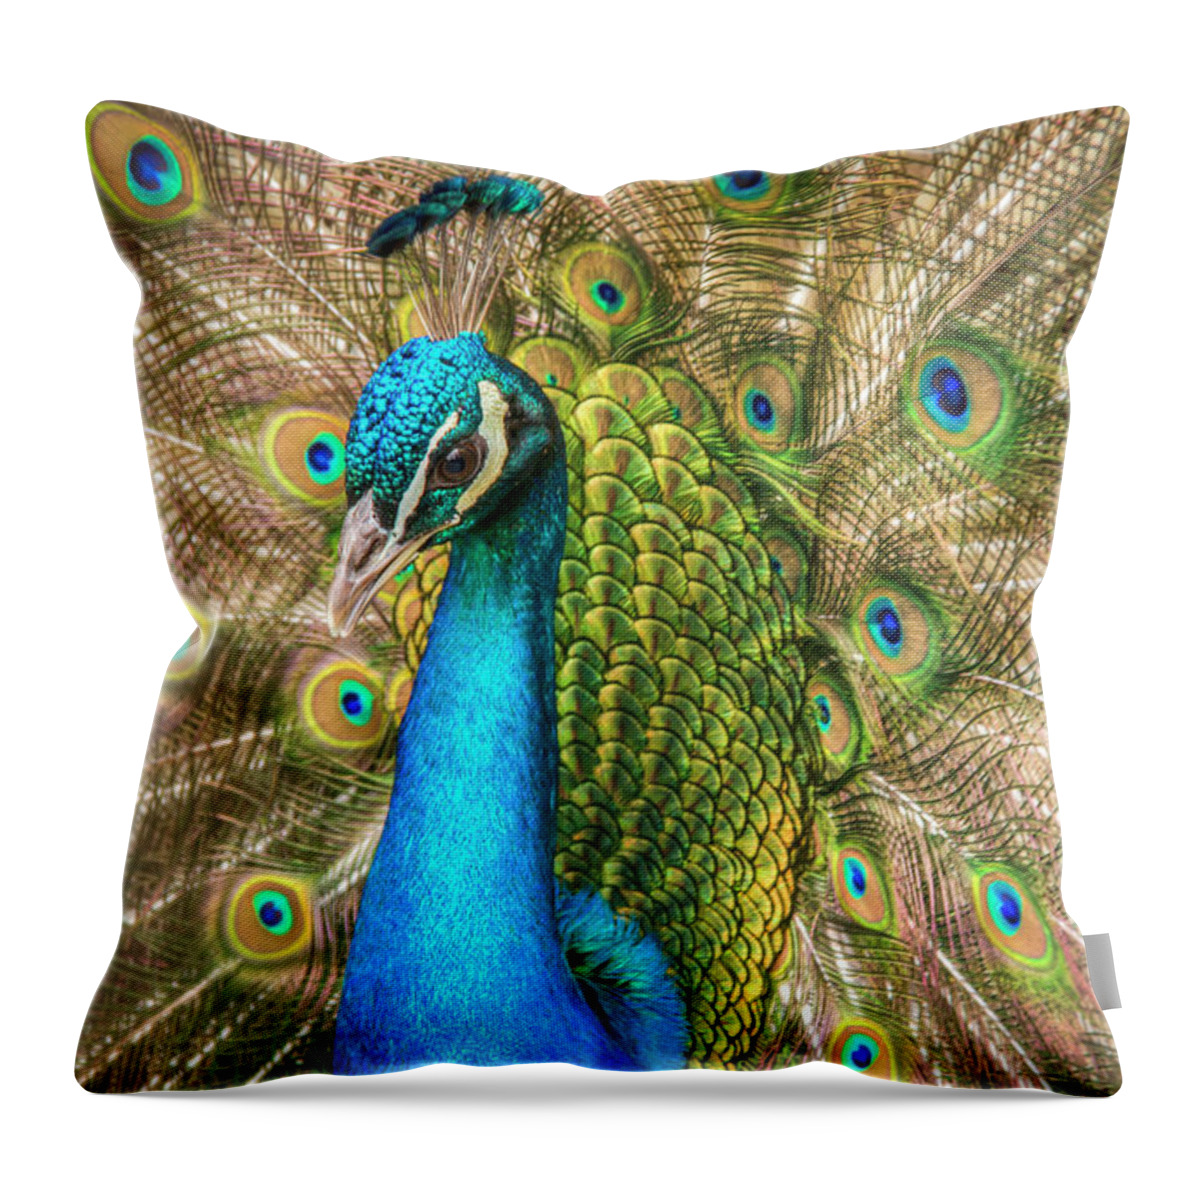 Peacocks Throw Pillow featuring the photograph Not Just A Pretty Face by Kristina Rinell